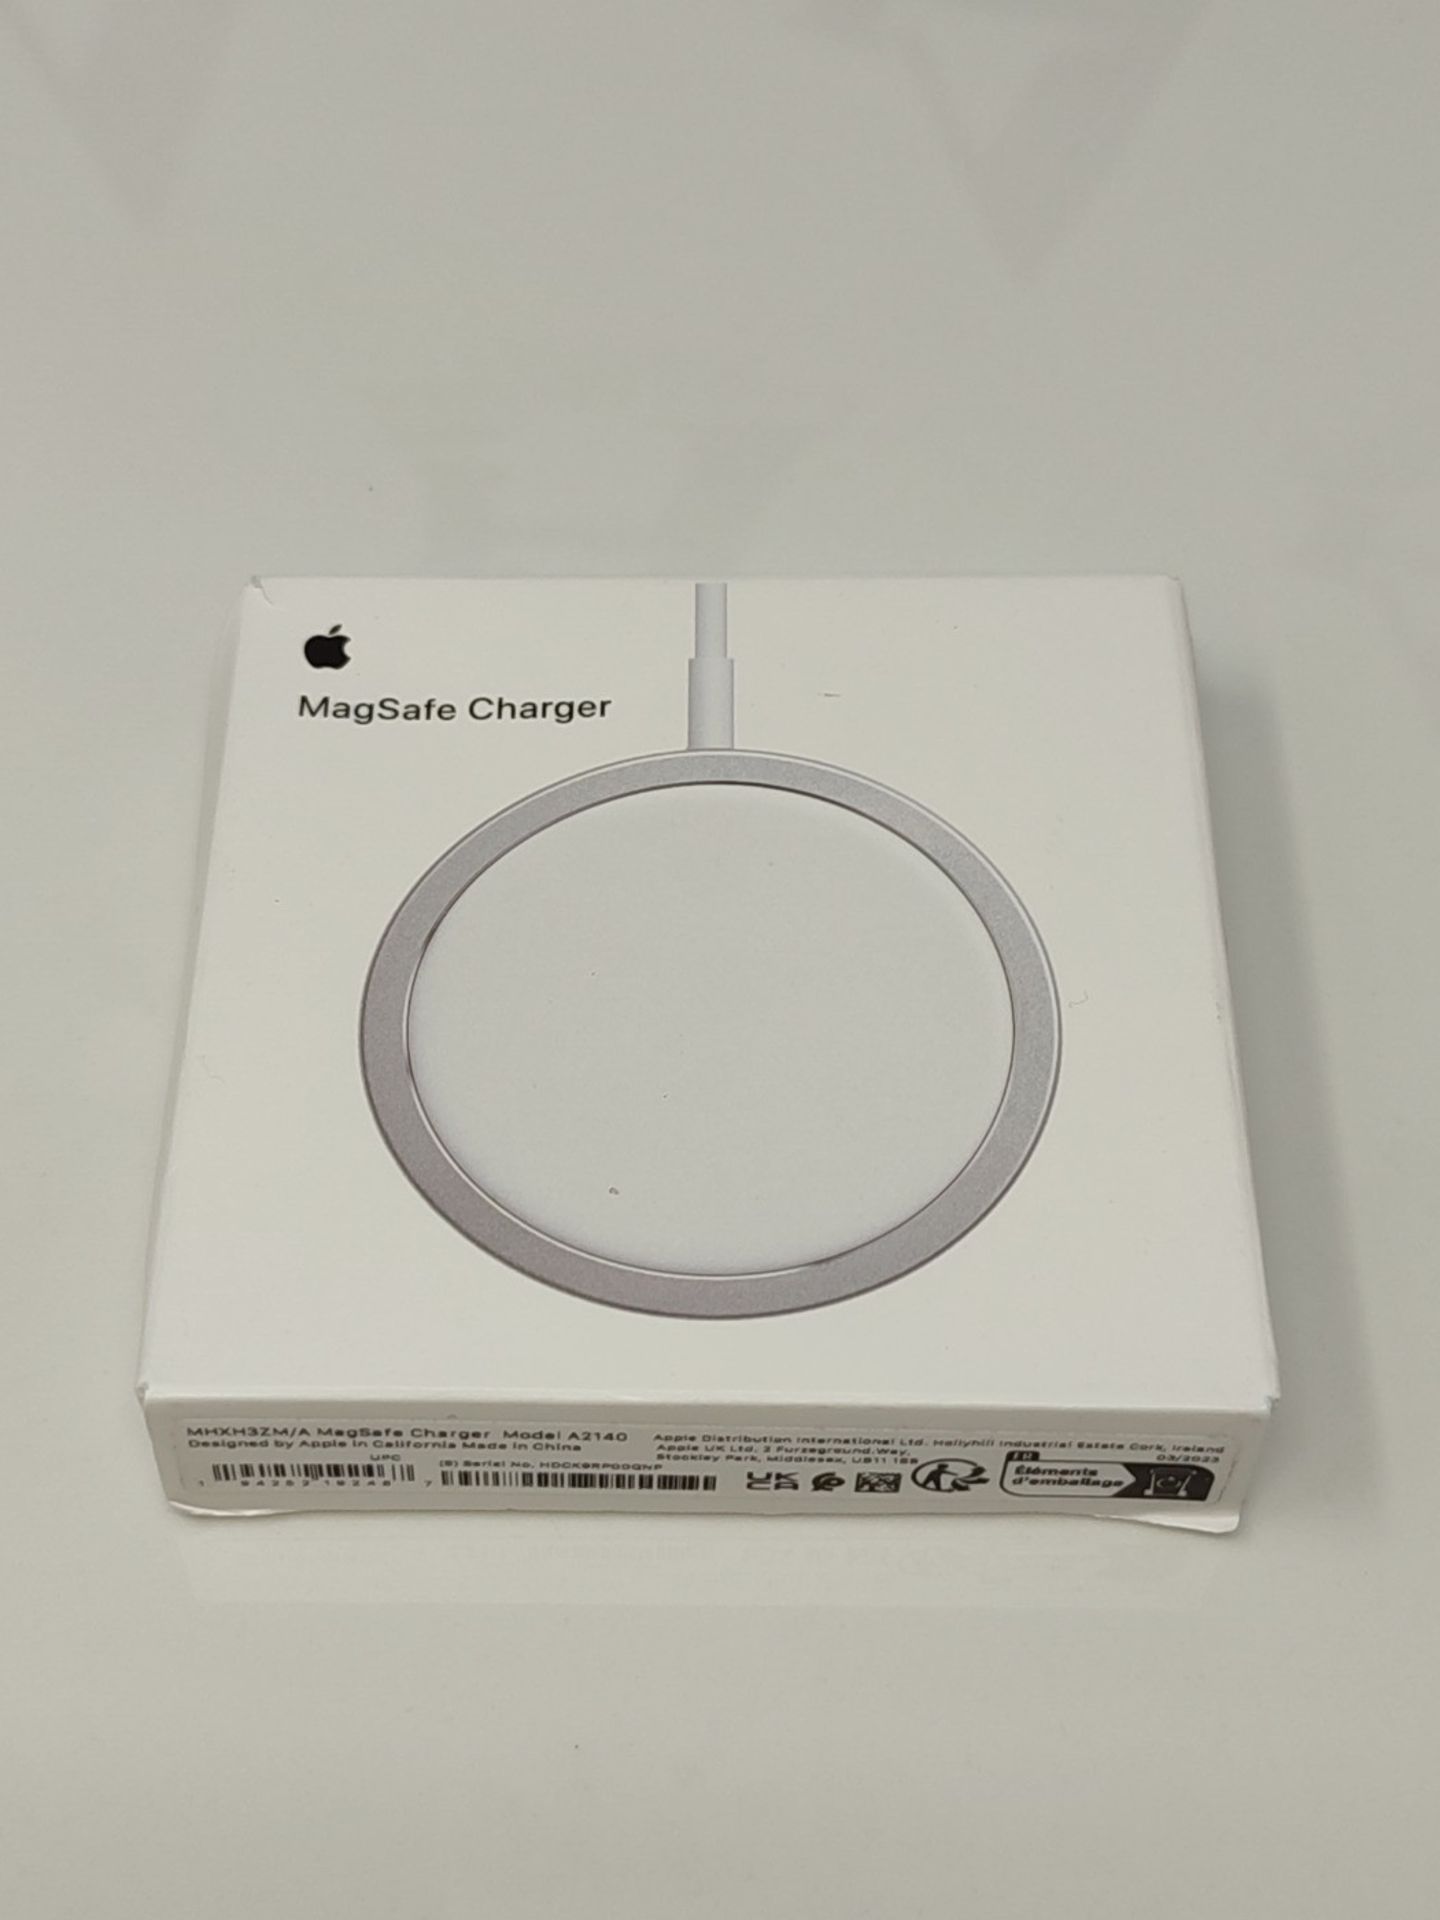 MagSafe Charger - Image 2 of 3